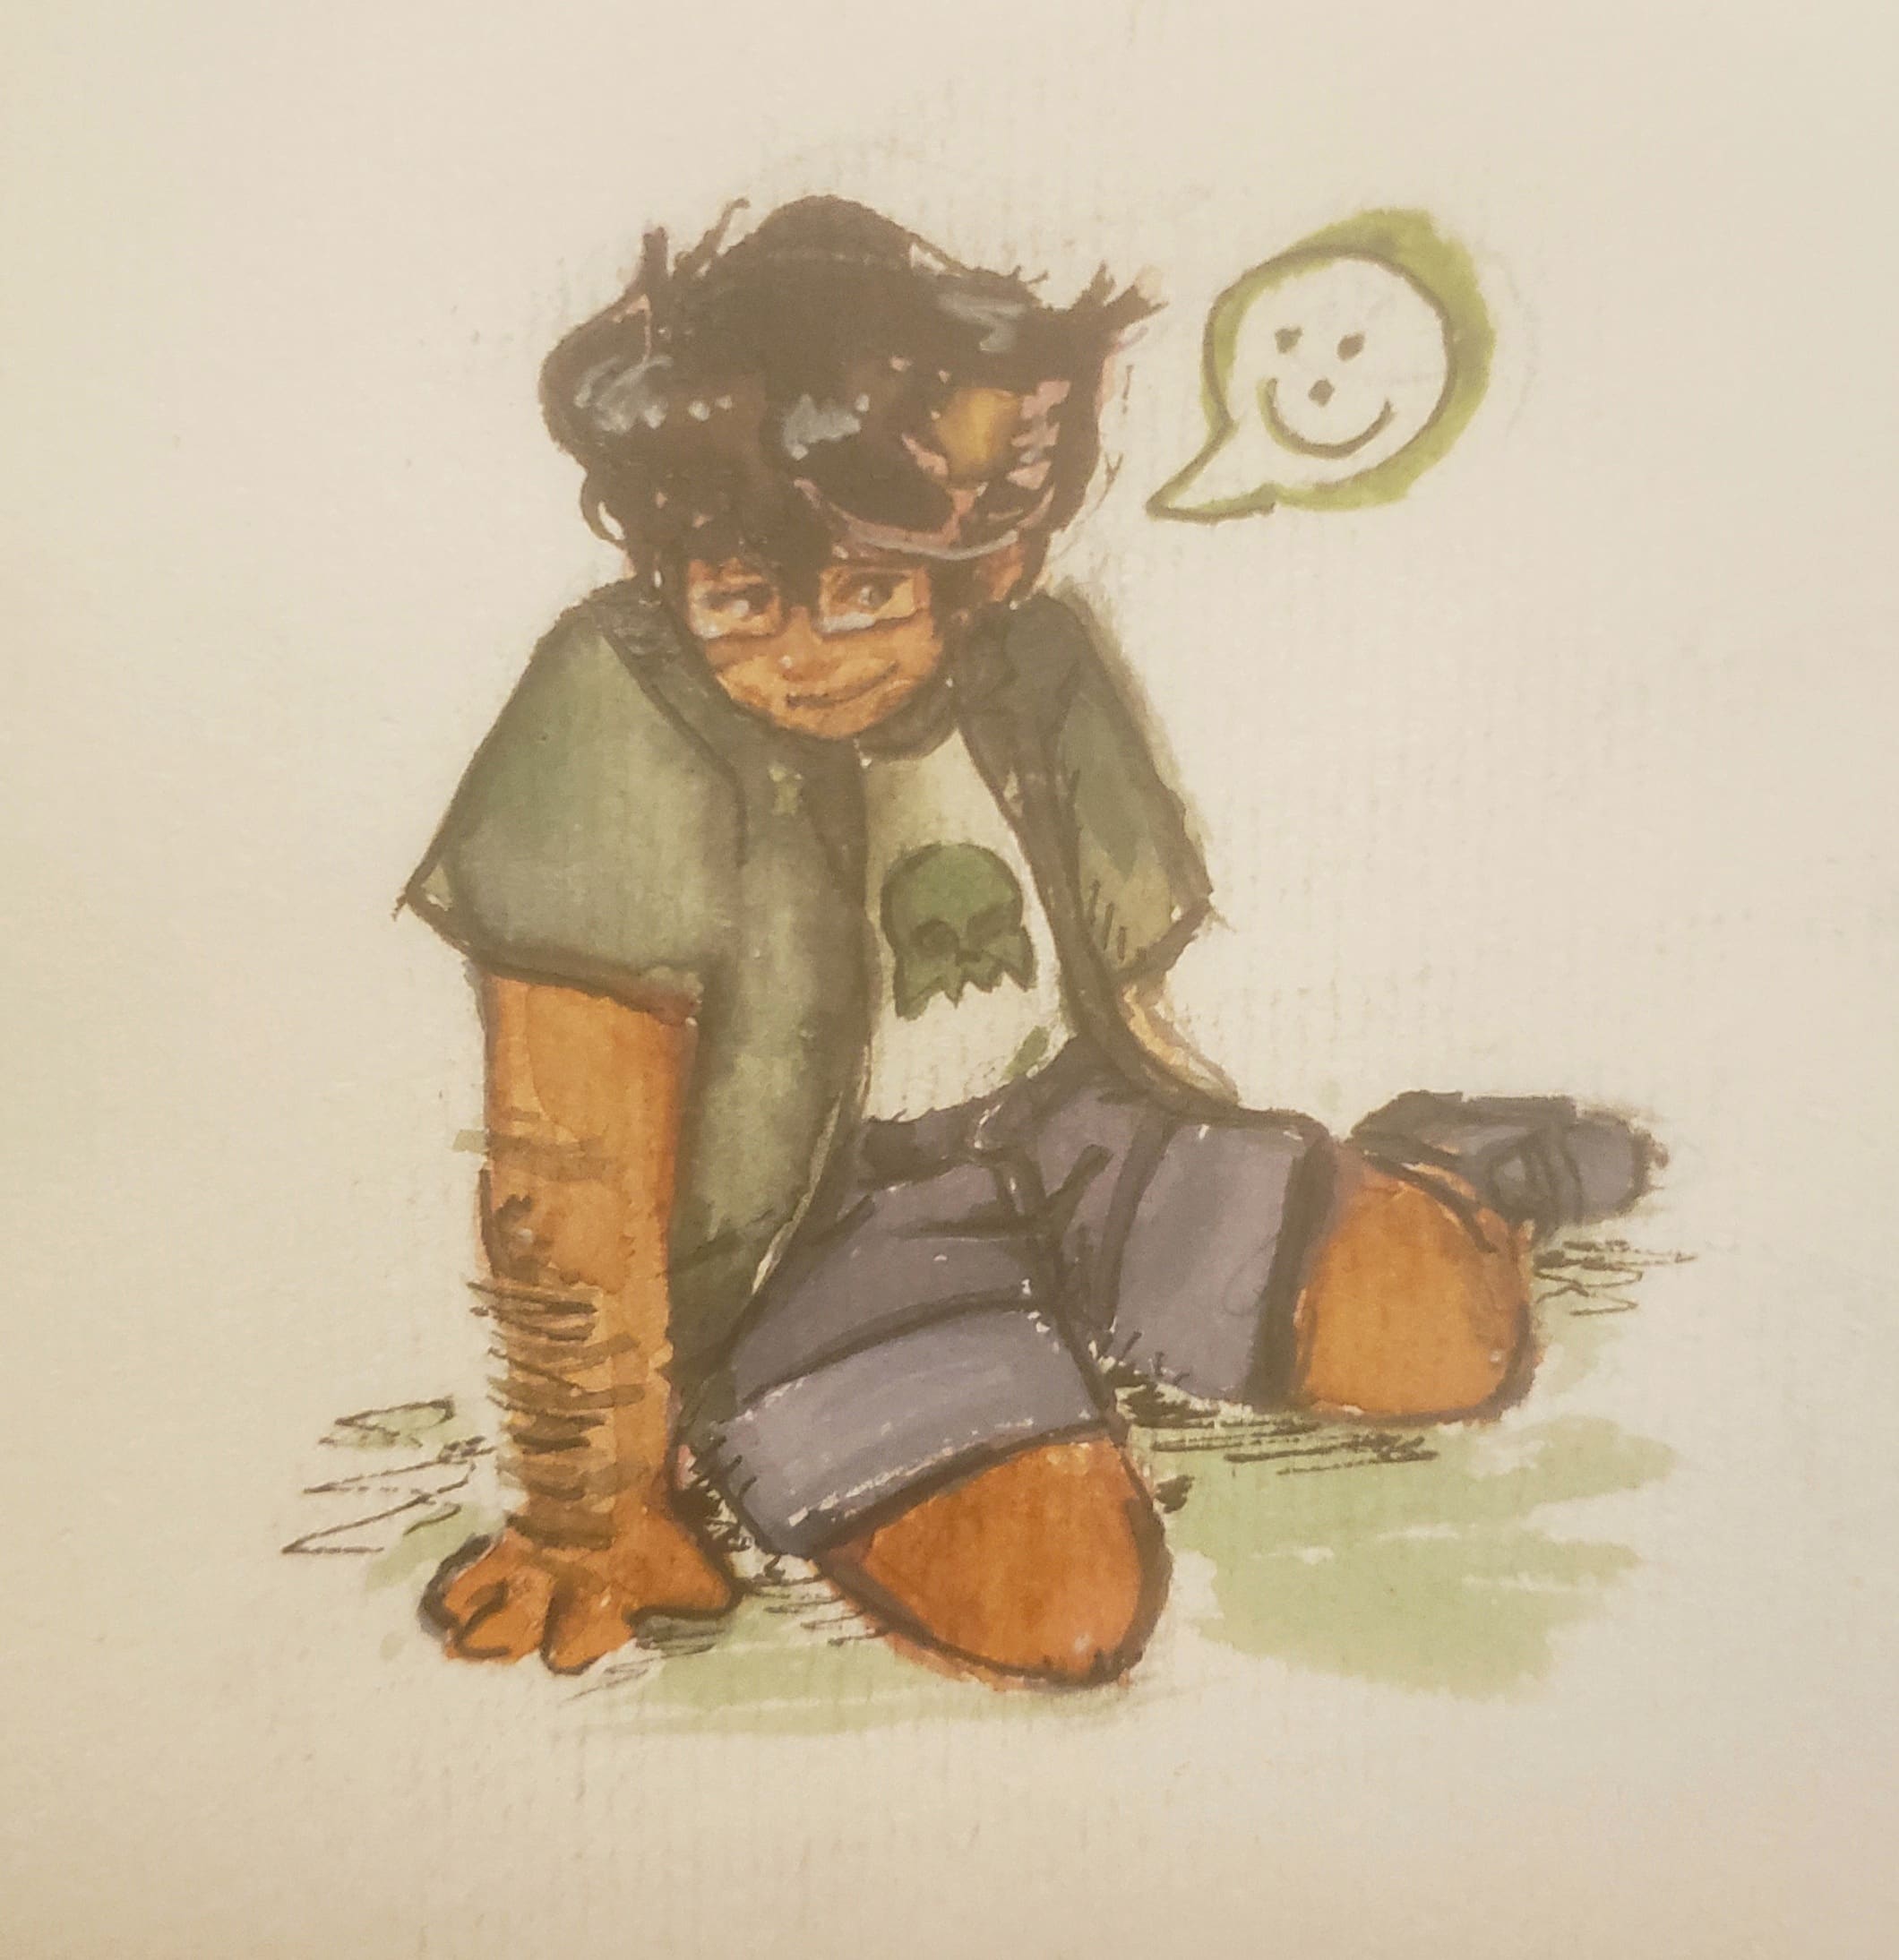 A watercolour illustration of Jake English sitting on the ground. He is smiling faintly.